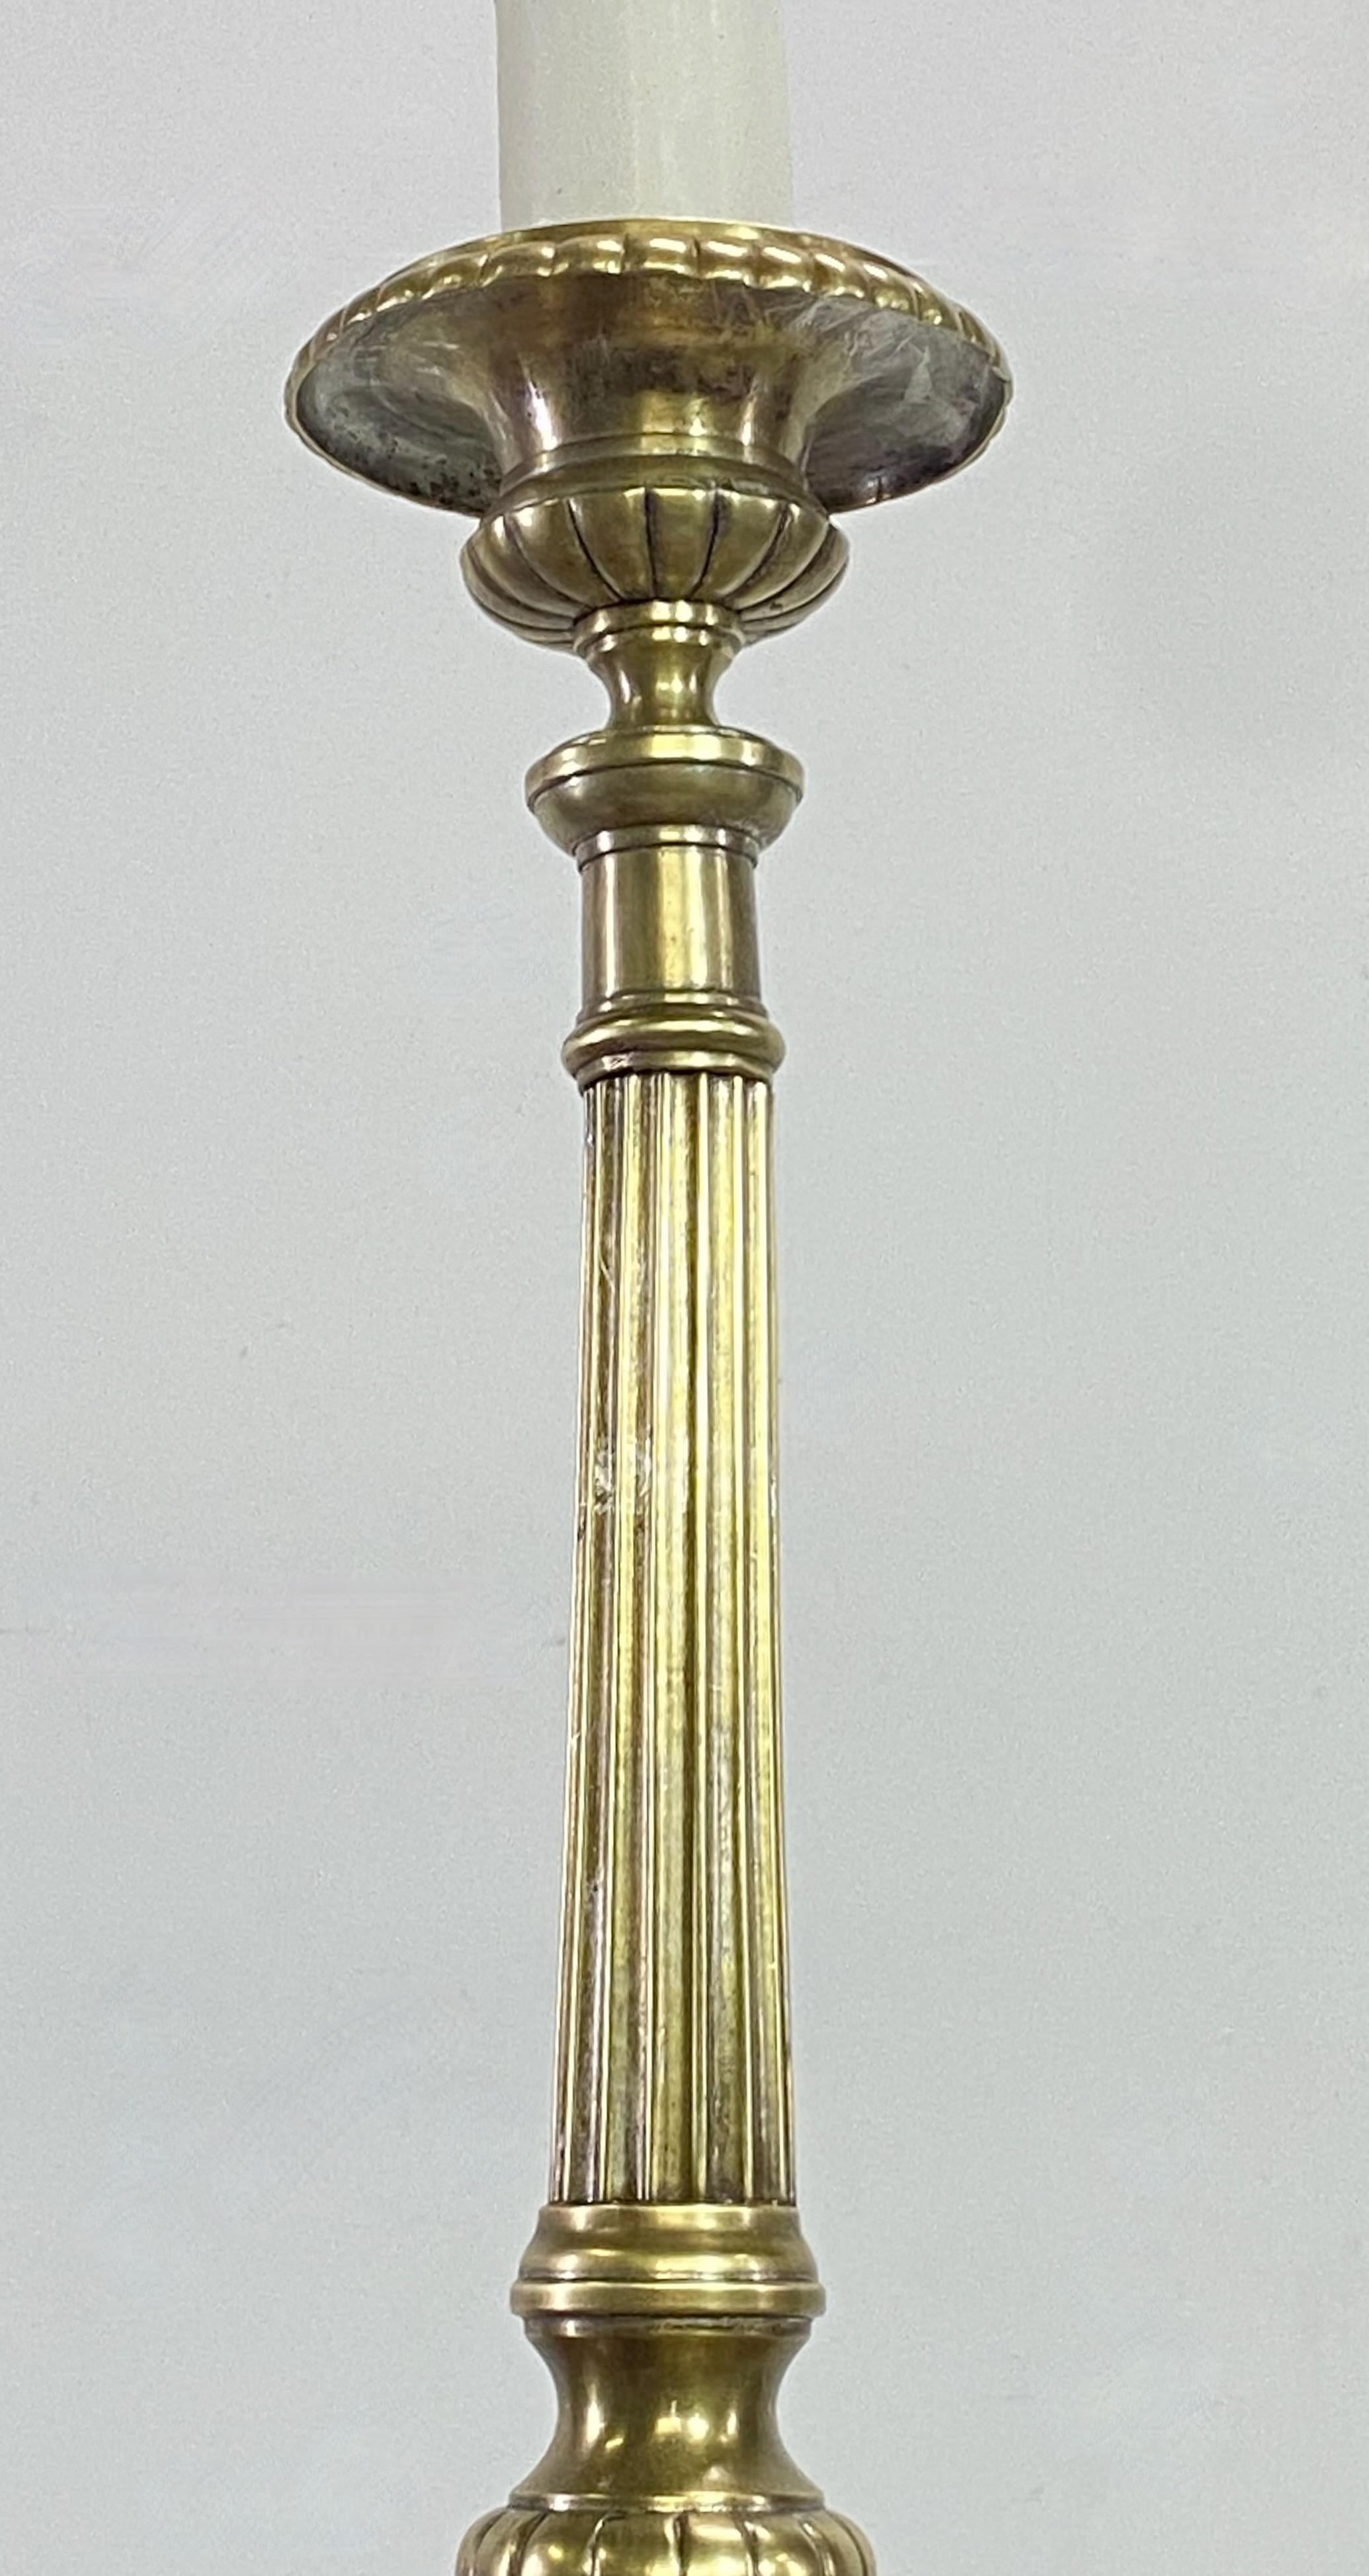 Pair of Early 19th Century European Brass Candlesticks, circa 1840 For Sale 3